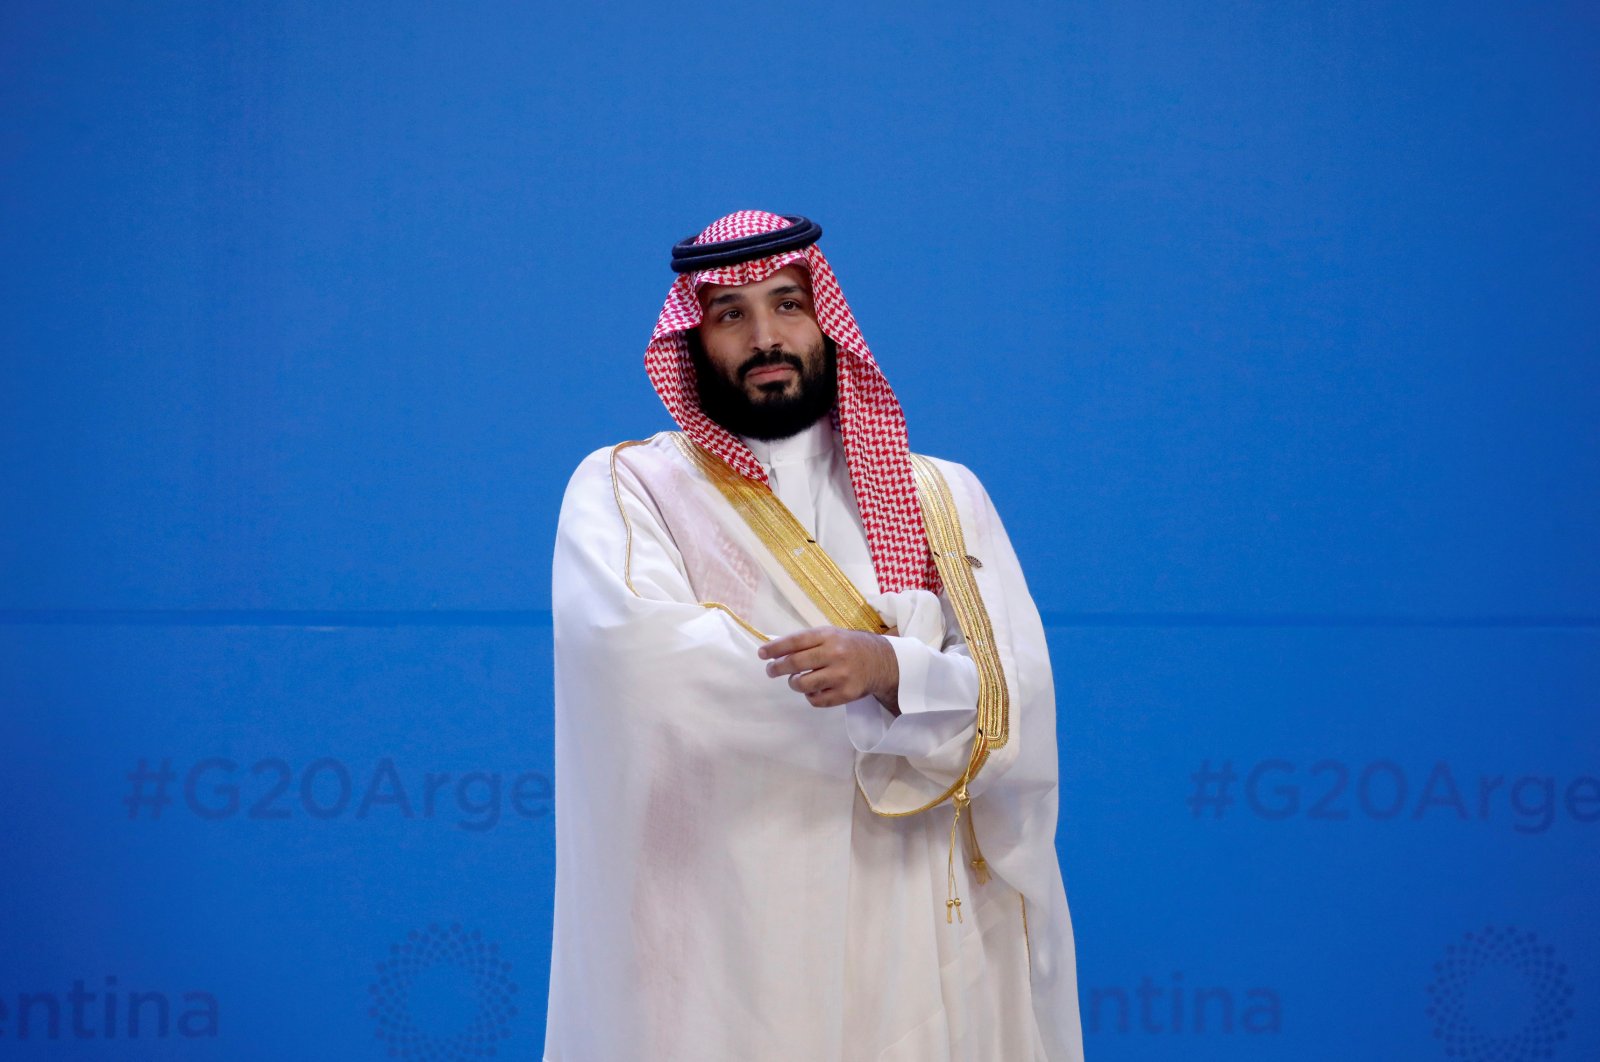 Saudi Arabia's Crown Prince M. bin Salman waits for the family photo during the G20 summit in Buenos Aires, Argentina, Nov. 30, 2018. (Reuters Photo)